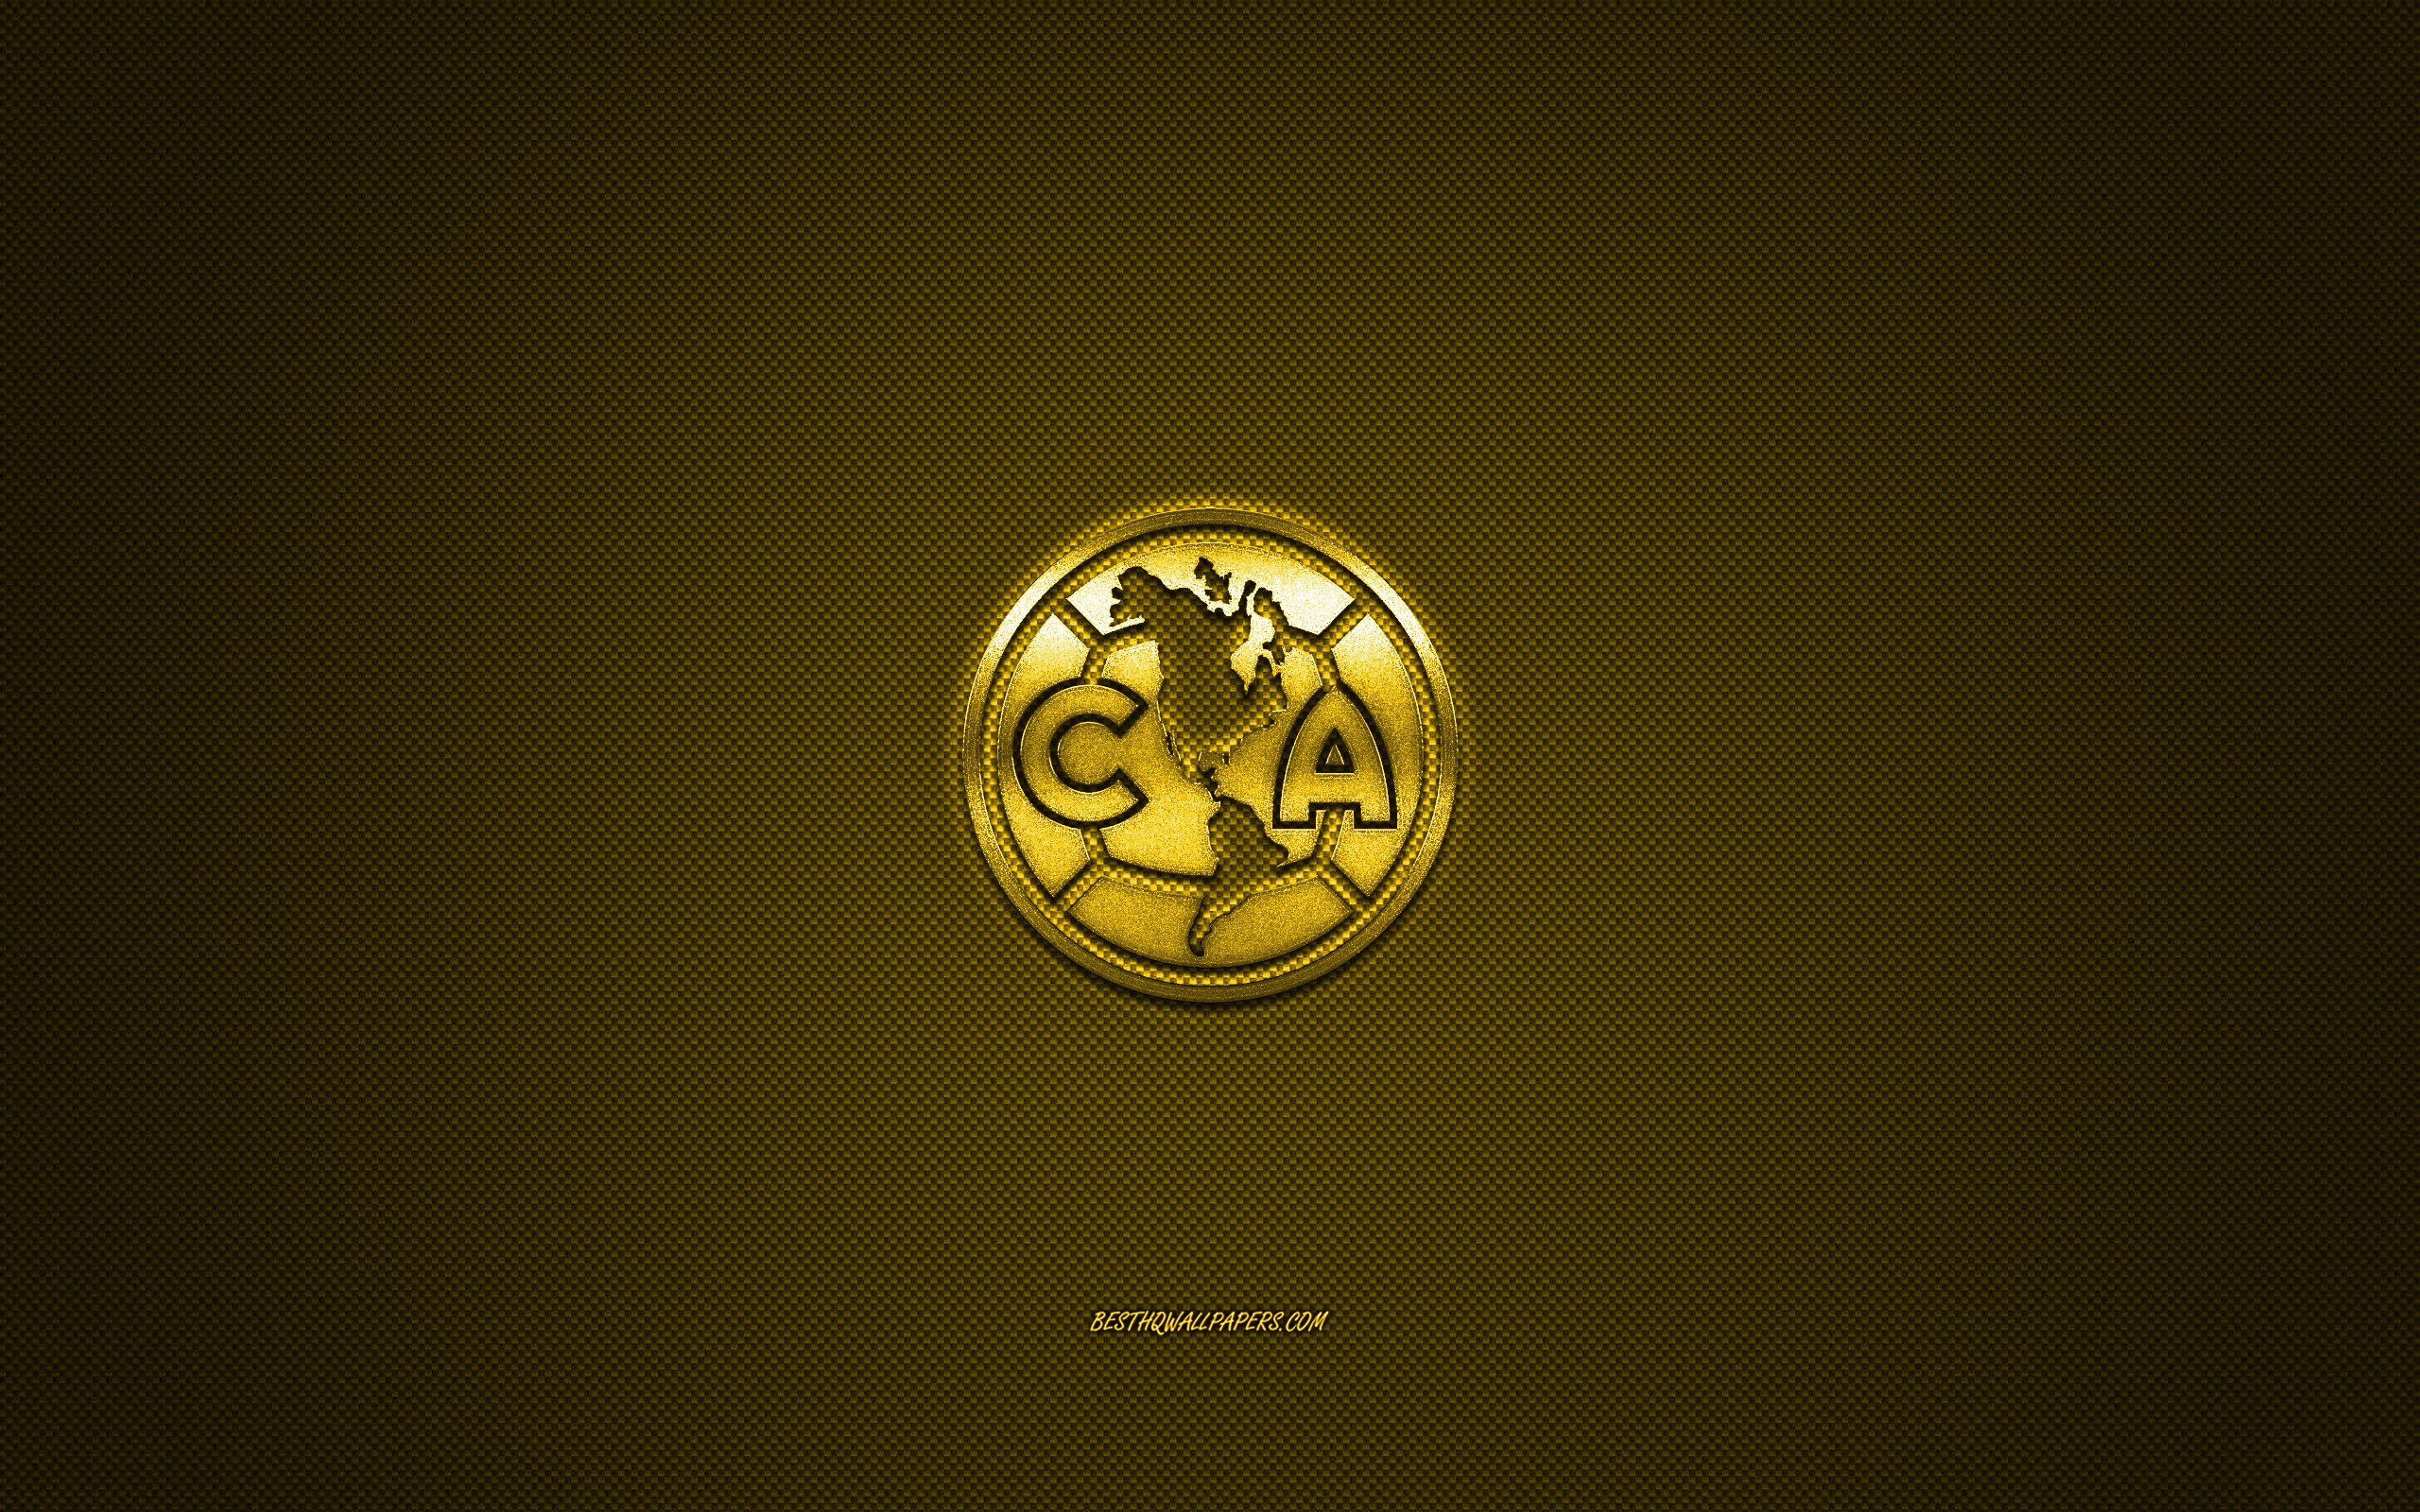 Download wallpapers Club America, Mexican football club, Liga MX, yellow  logo, yellow carbon fiber background, football, Mexico city, Mexico, Club  America logo for desktop with resolution 2560x1600. High Quality HD  pictures wallpapers